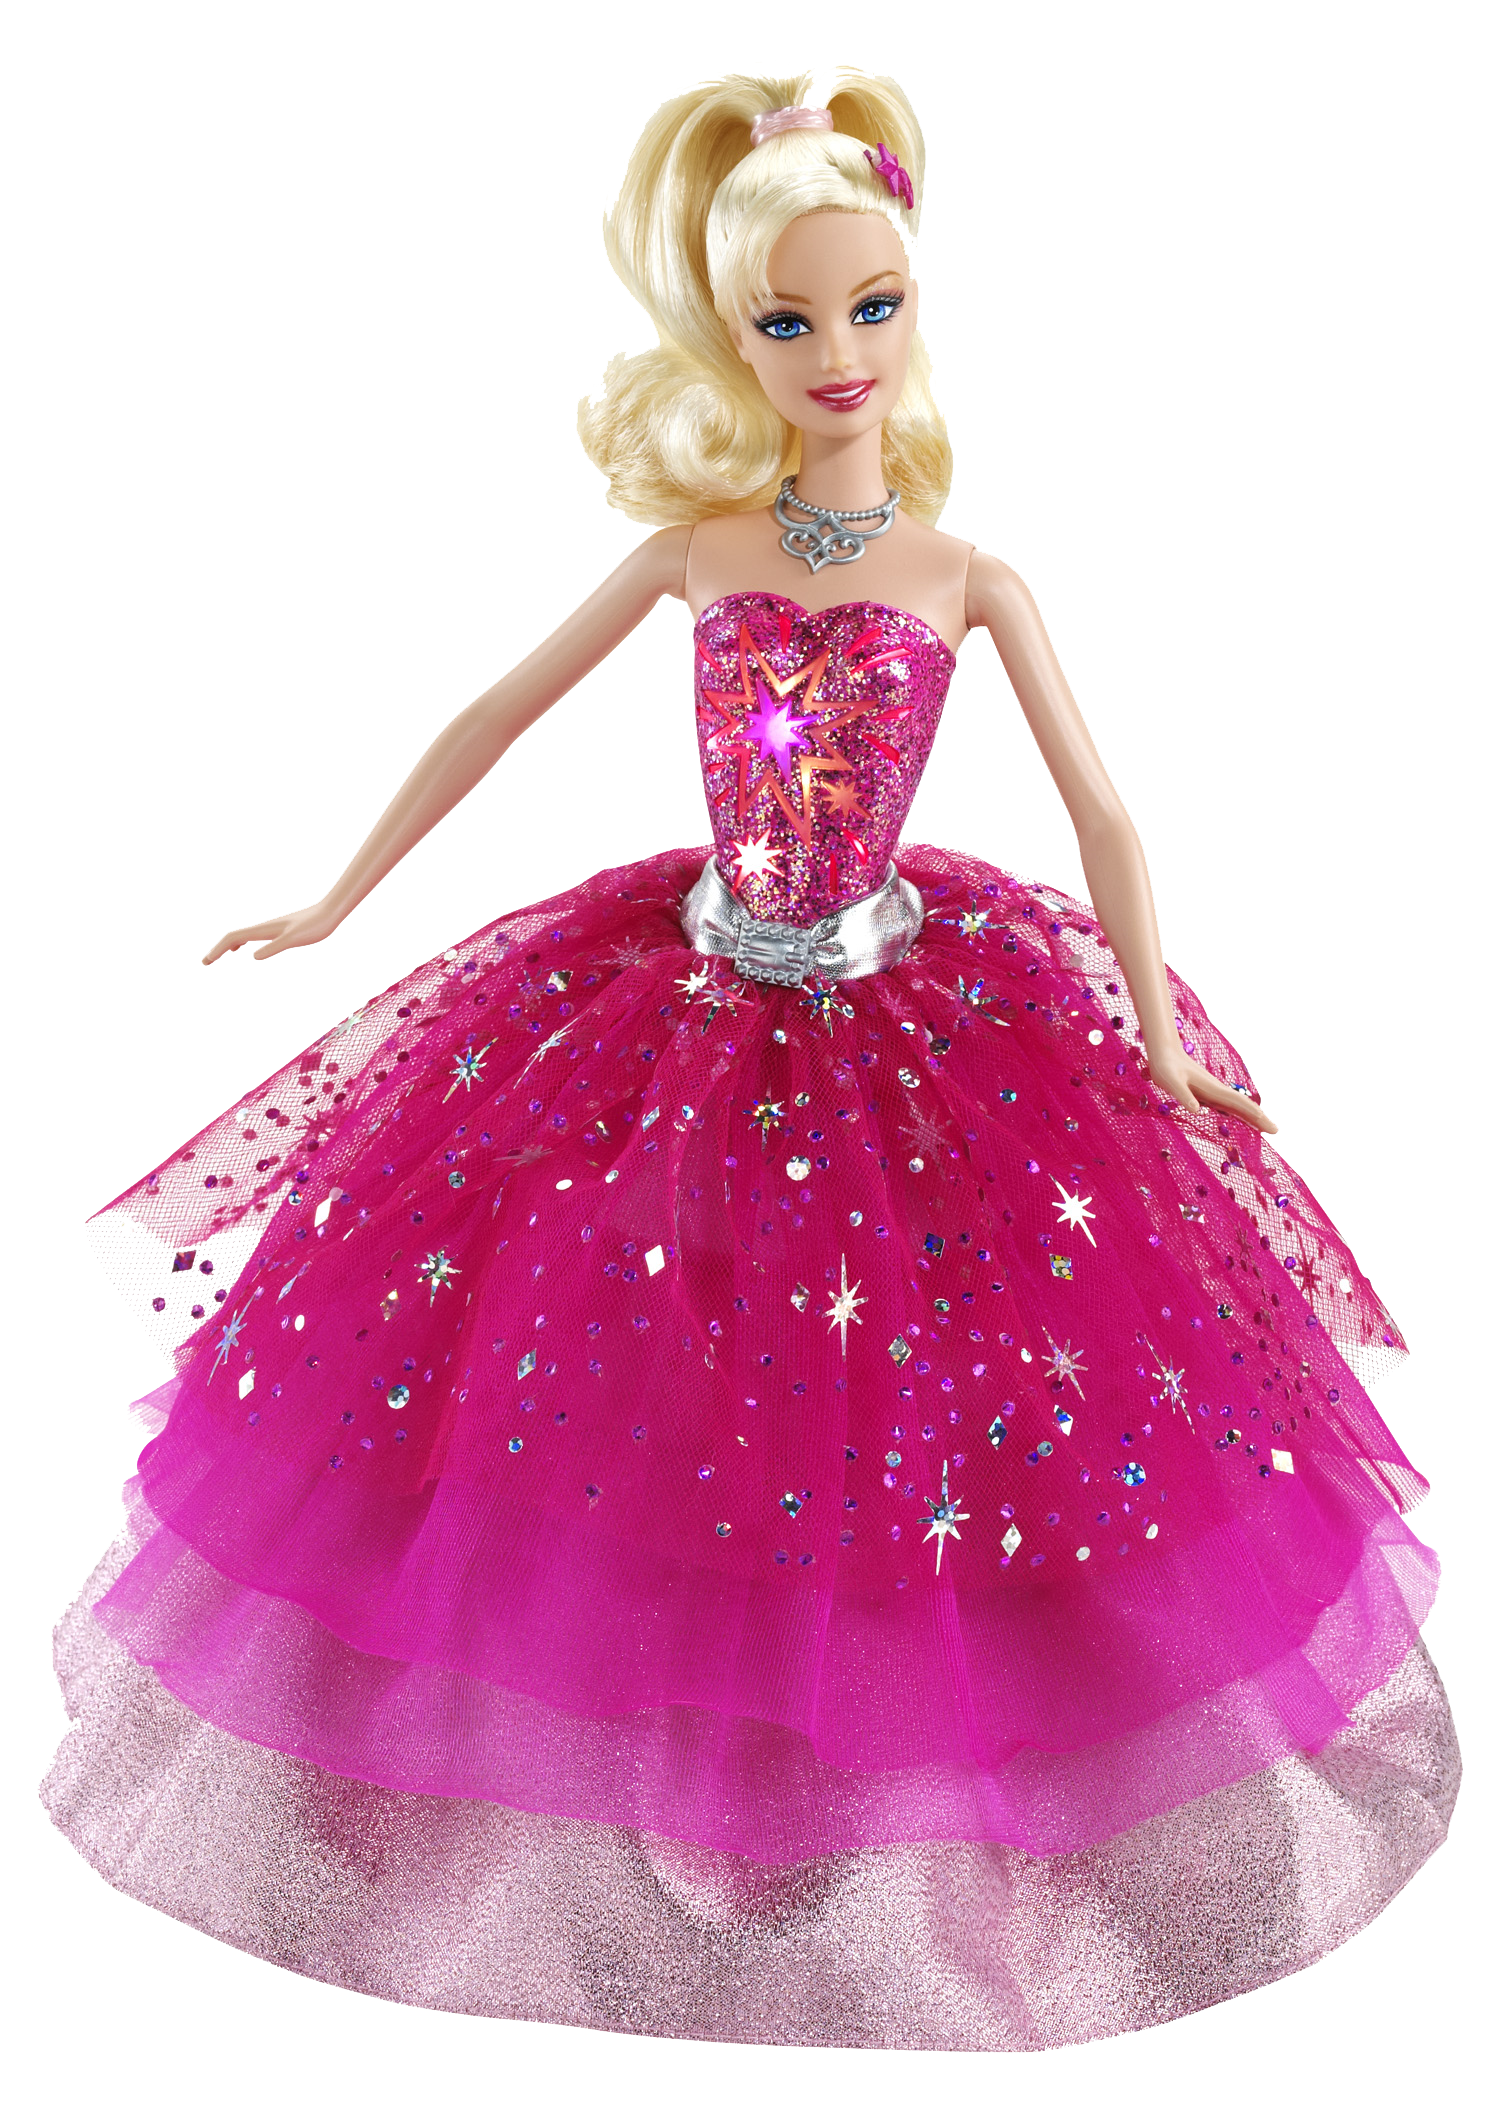 Pink Gown Doll Princess Barbie PNG Image